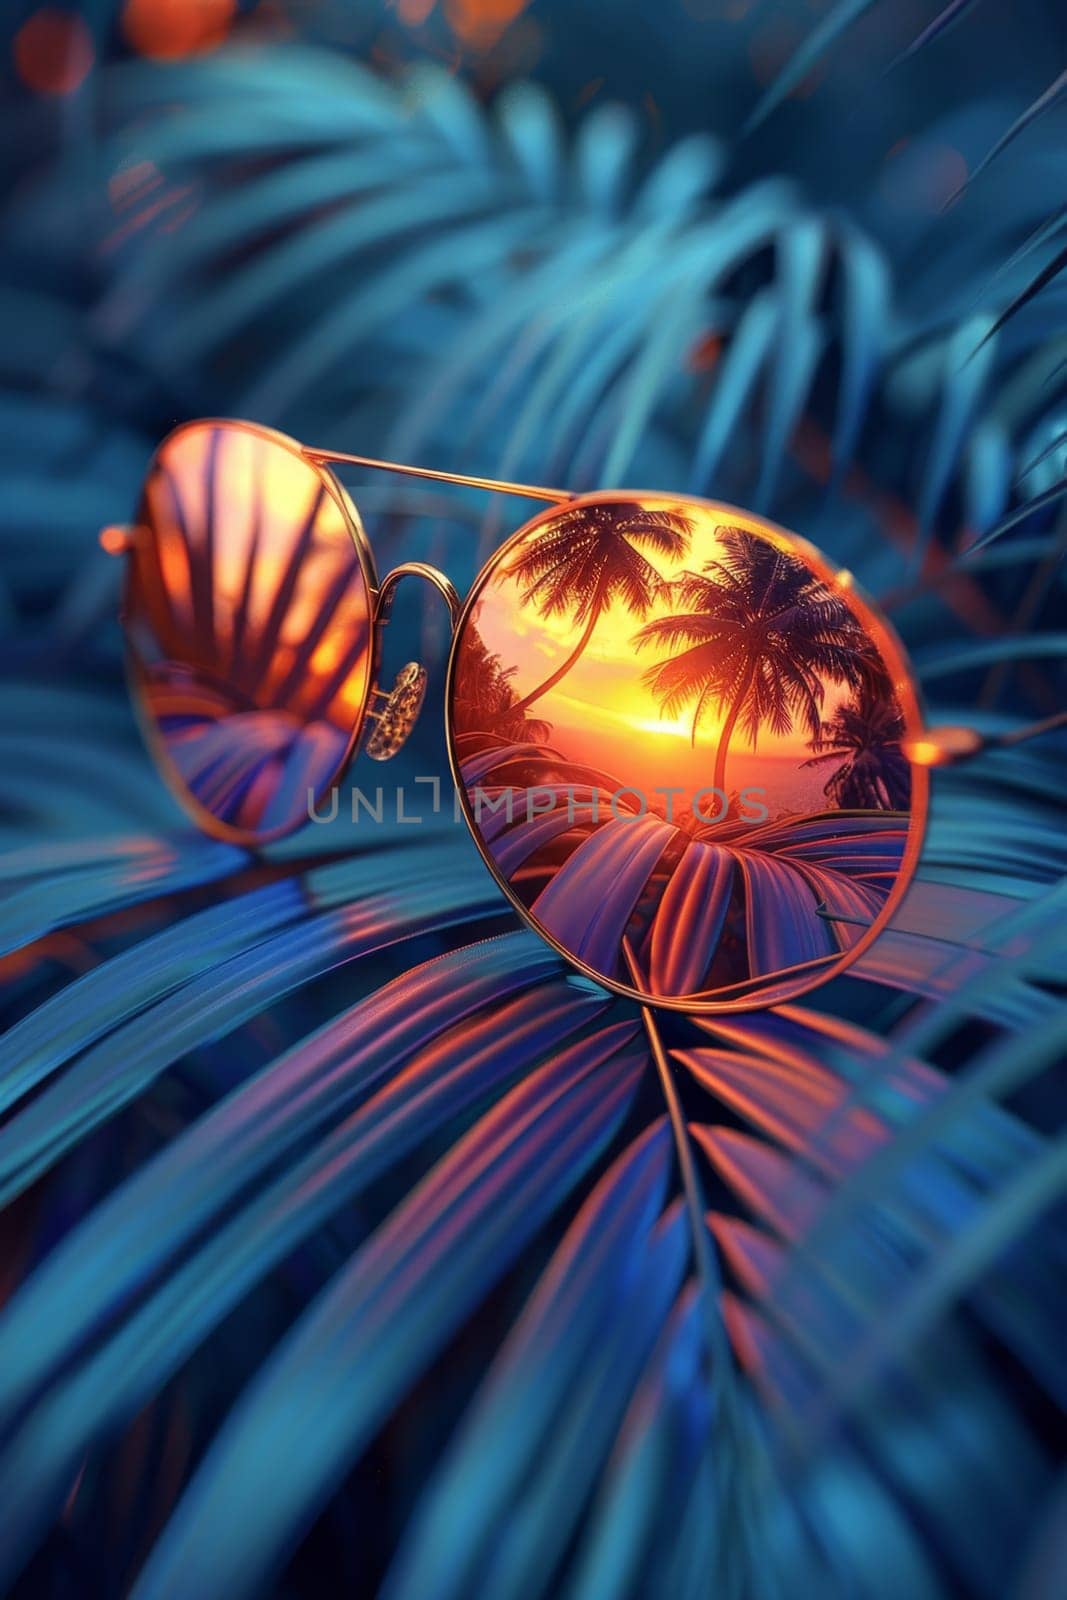 Summer colorful background. sunglasses. The concept of summer holidays.